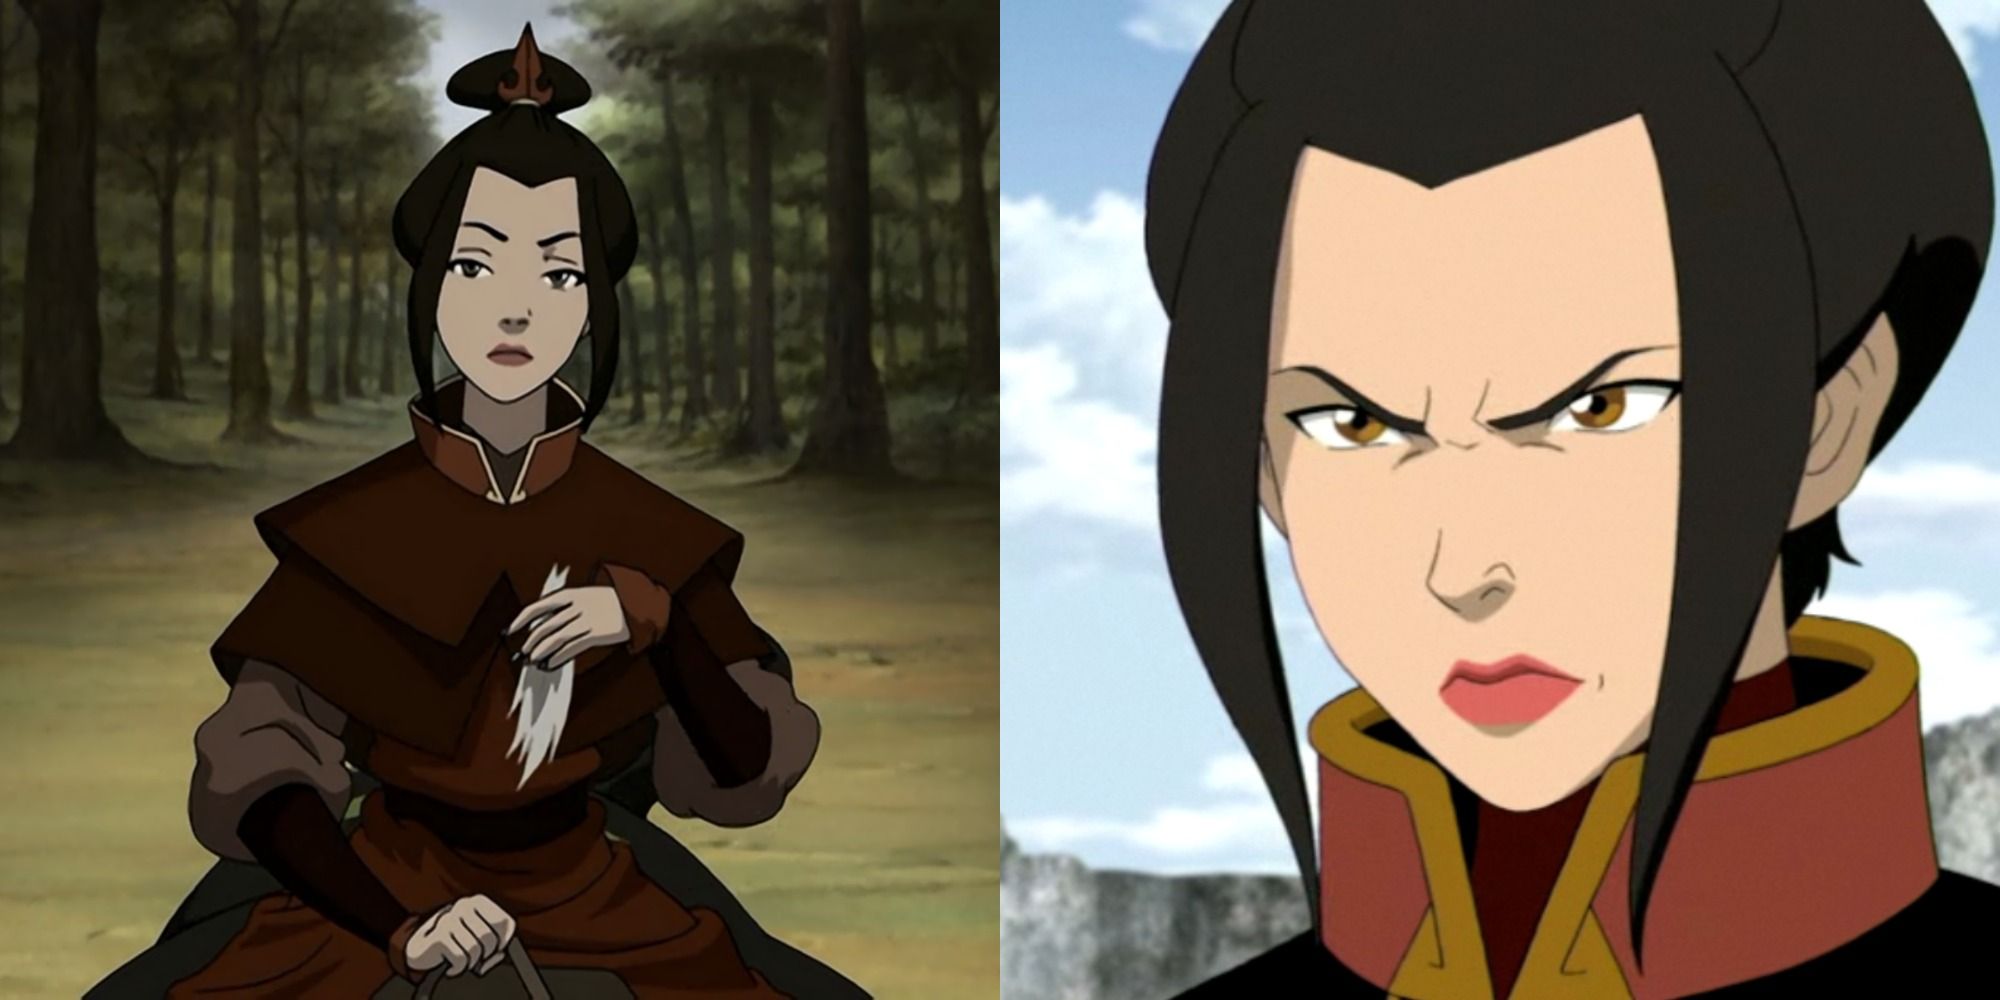 Split image showing Azula looking calm and angry in ATLA